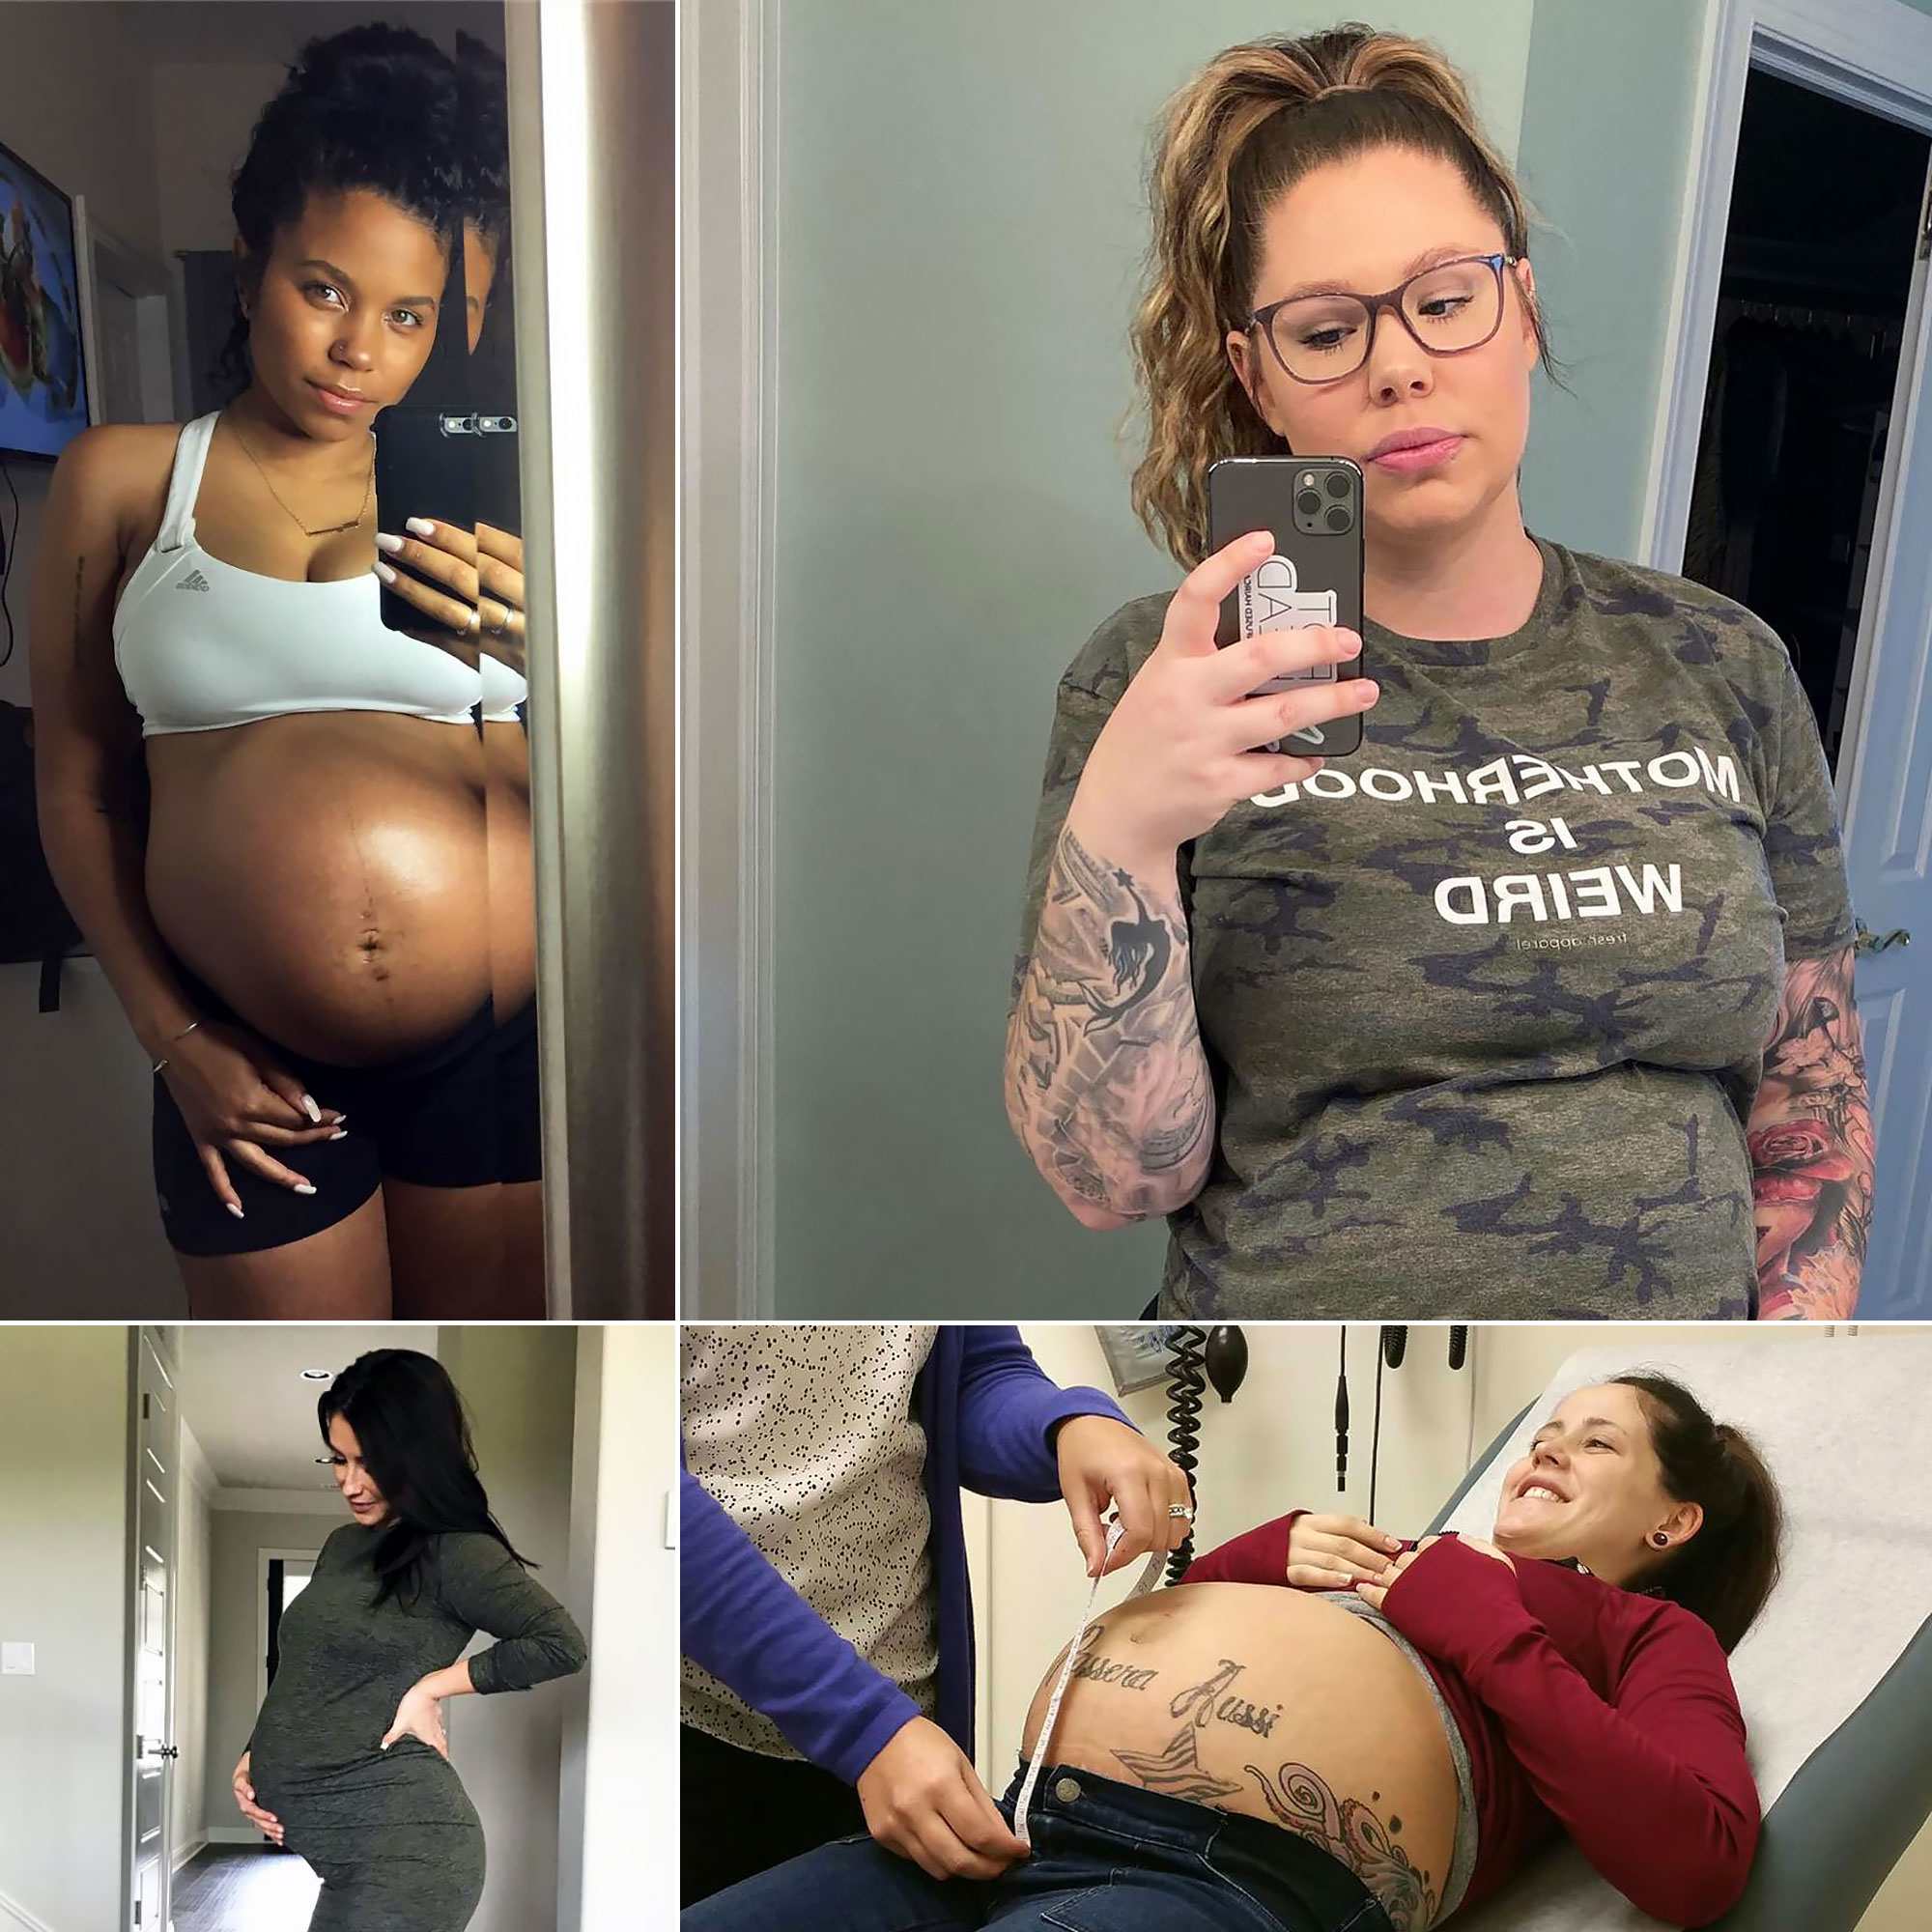 Pregnant Porn Stars Tattoo - Teen Mom' Baby Bumps: Reality Stars' Pregnancy Pics Over the Years